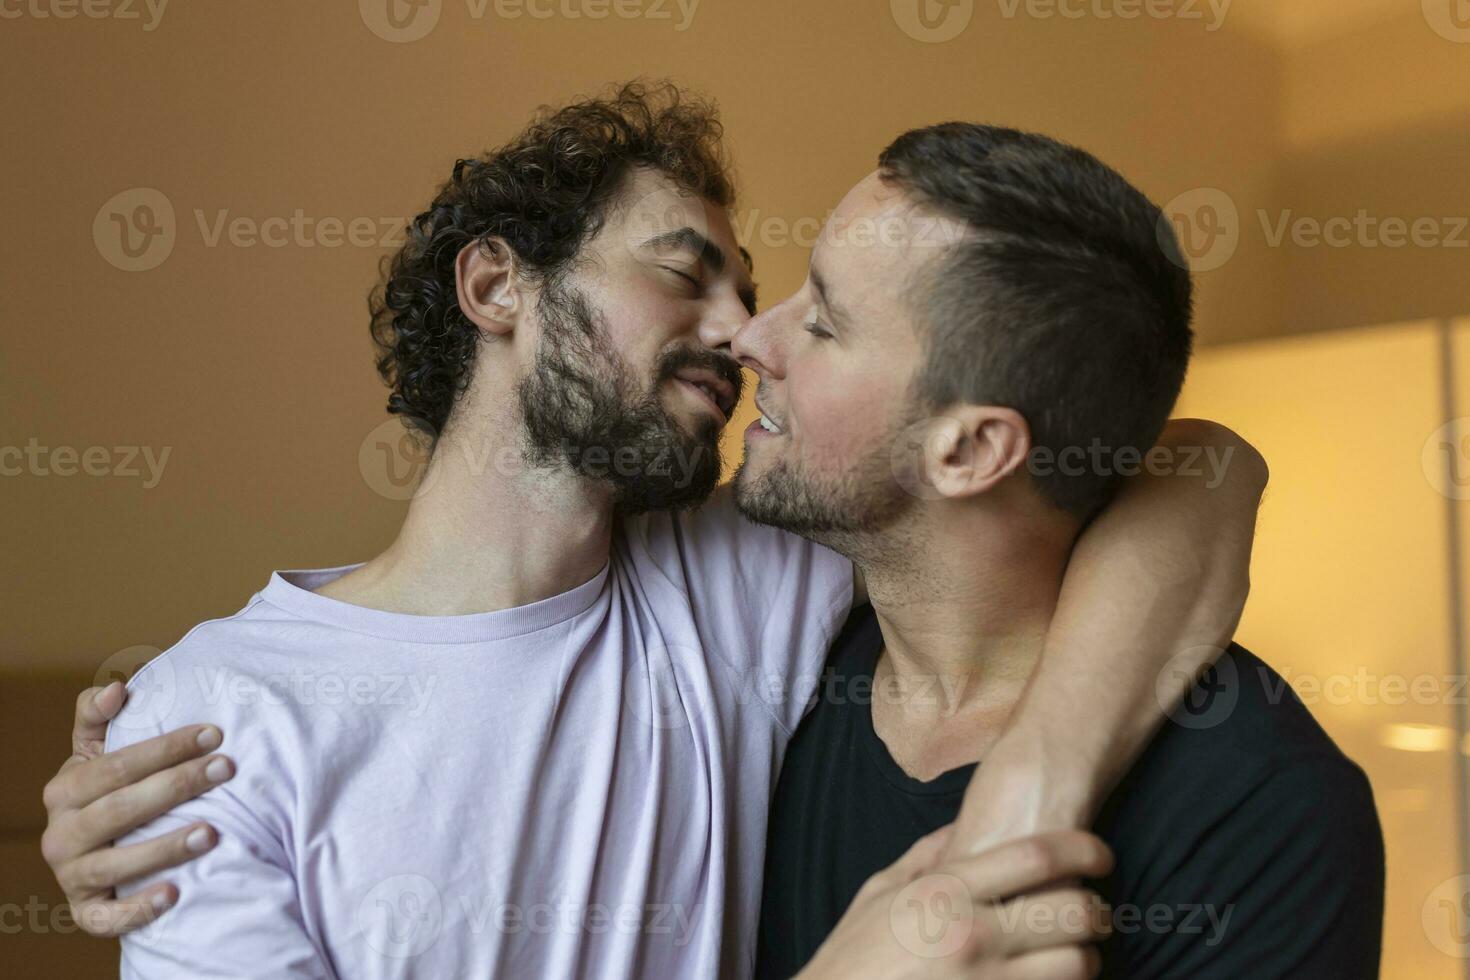 Two young man lgbtq gay couple dating in love hugging enjoying intimate tender sensual moment together kissing with eyes closed photo